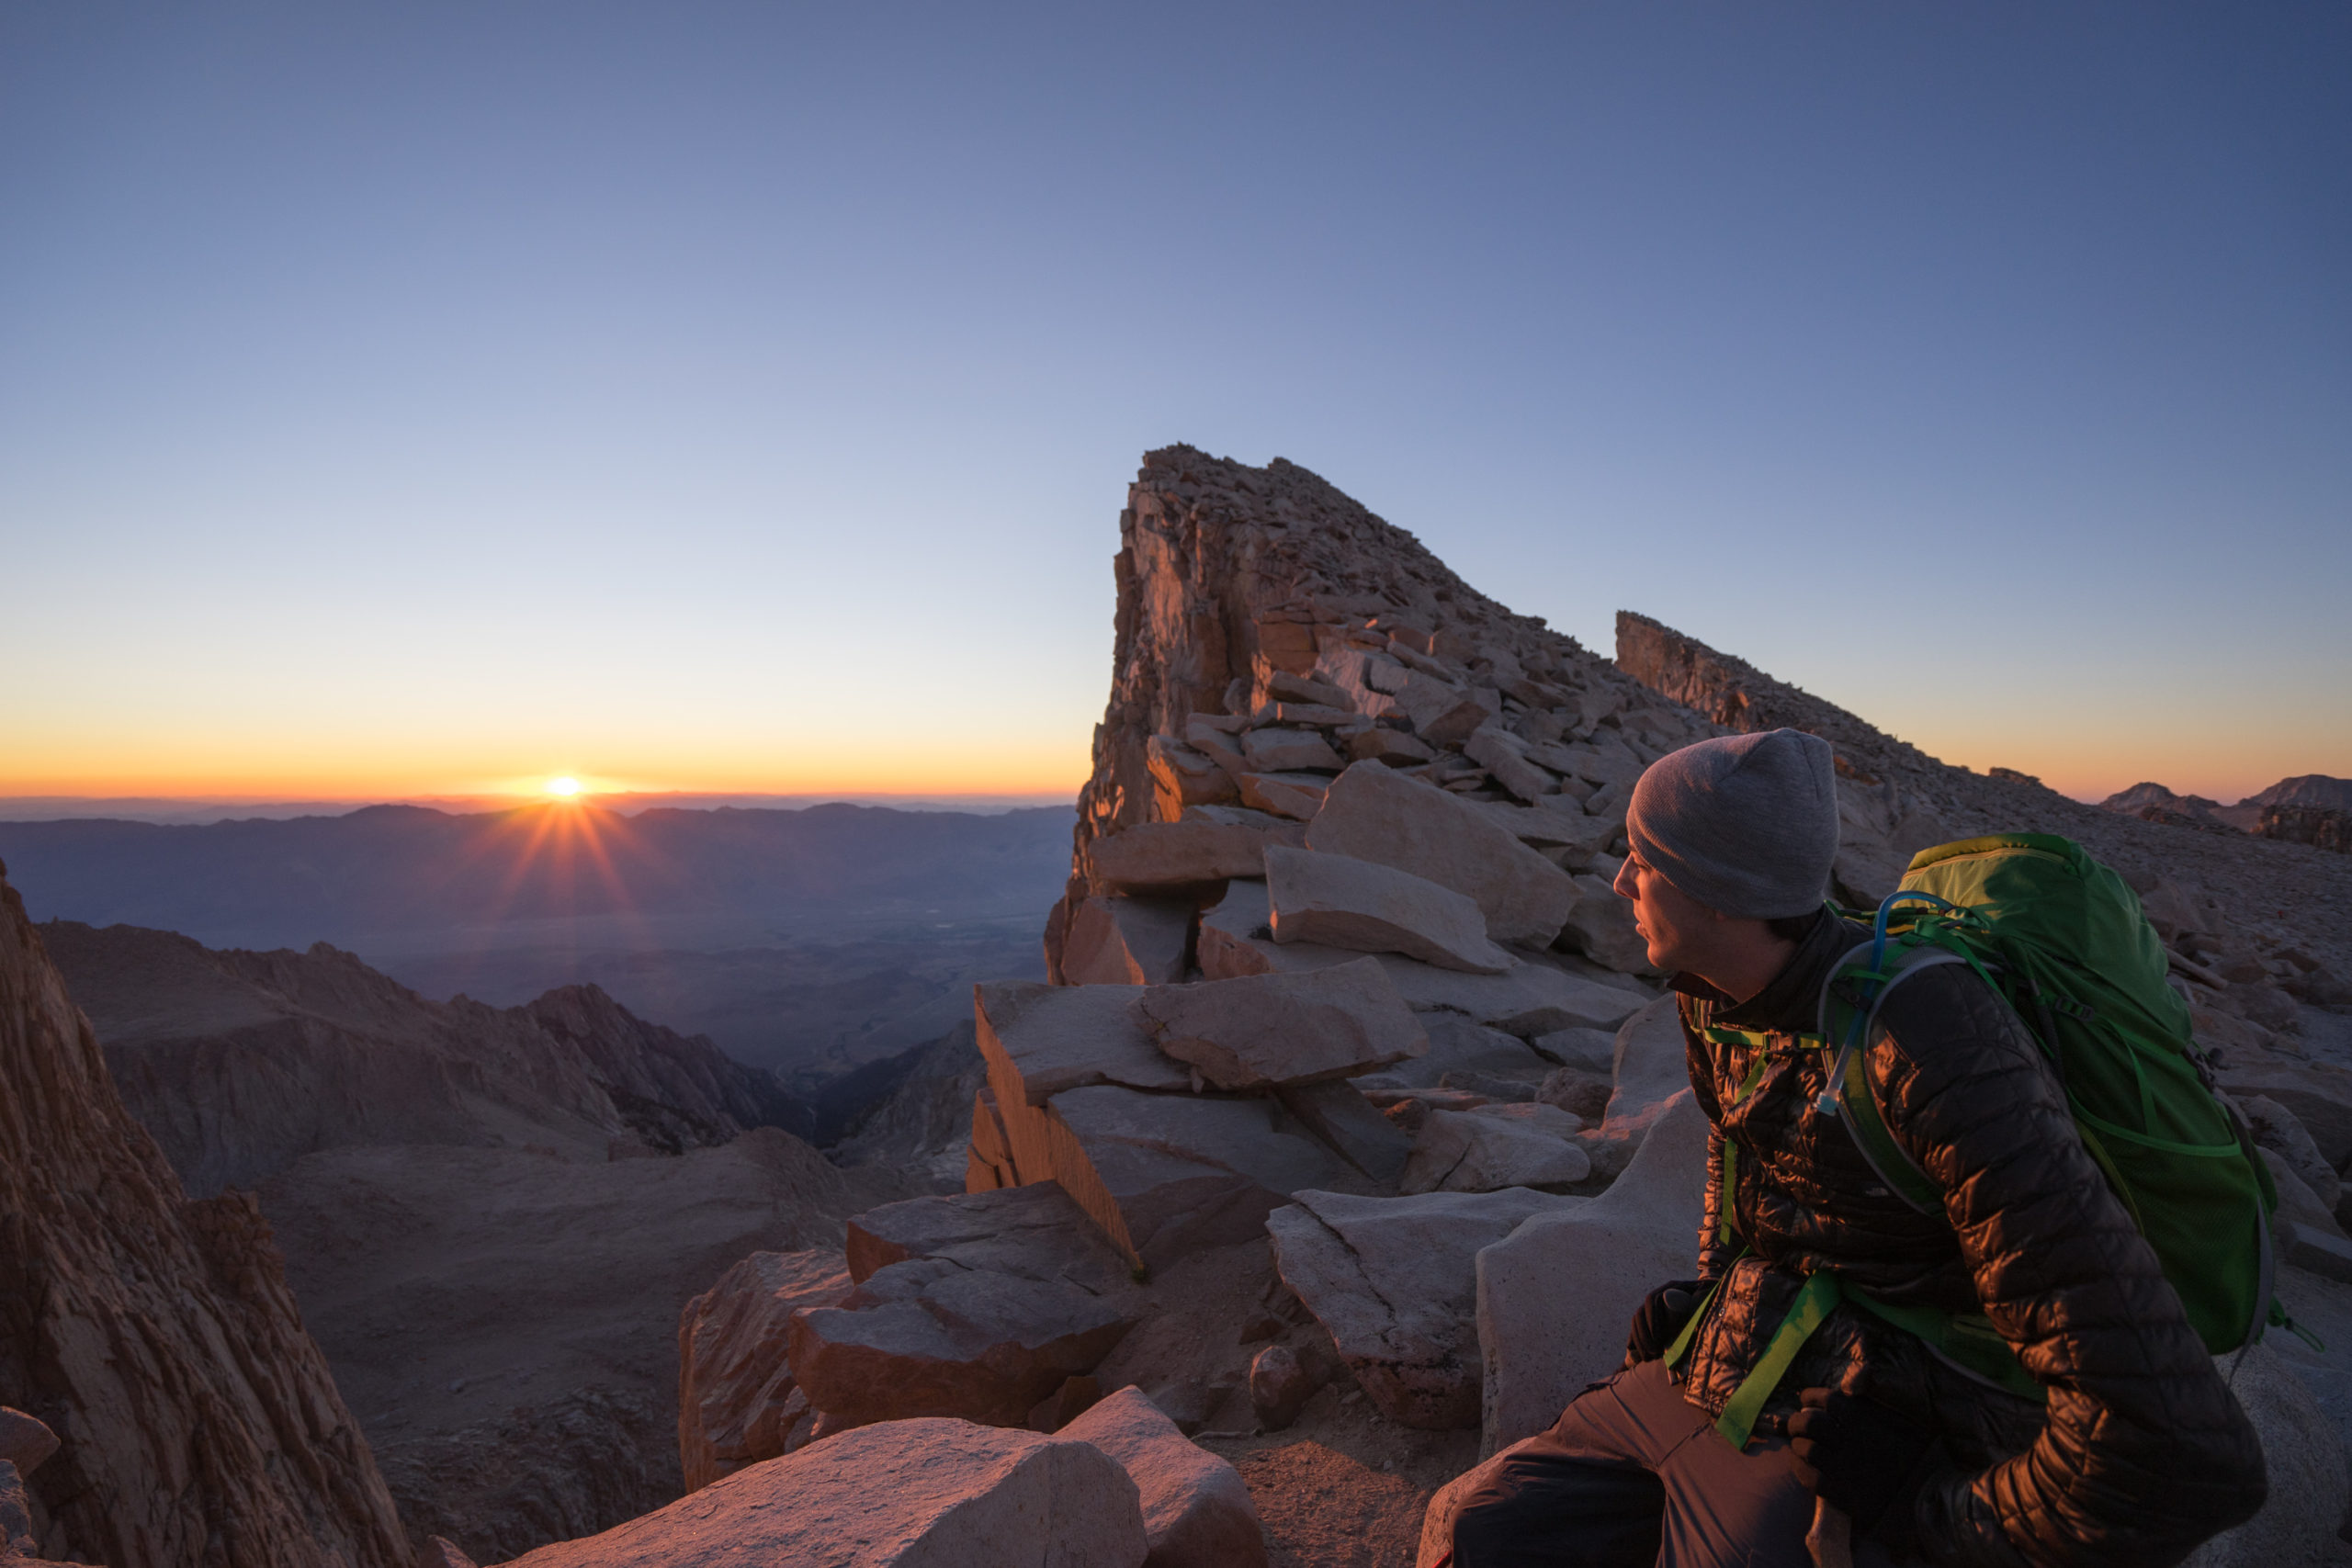 How To Climb Mt. Whitney: The Highest Peak In The US